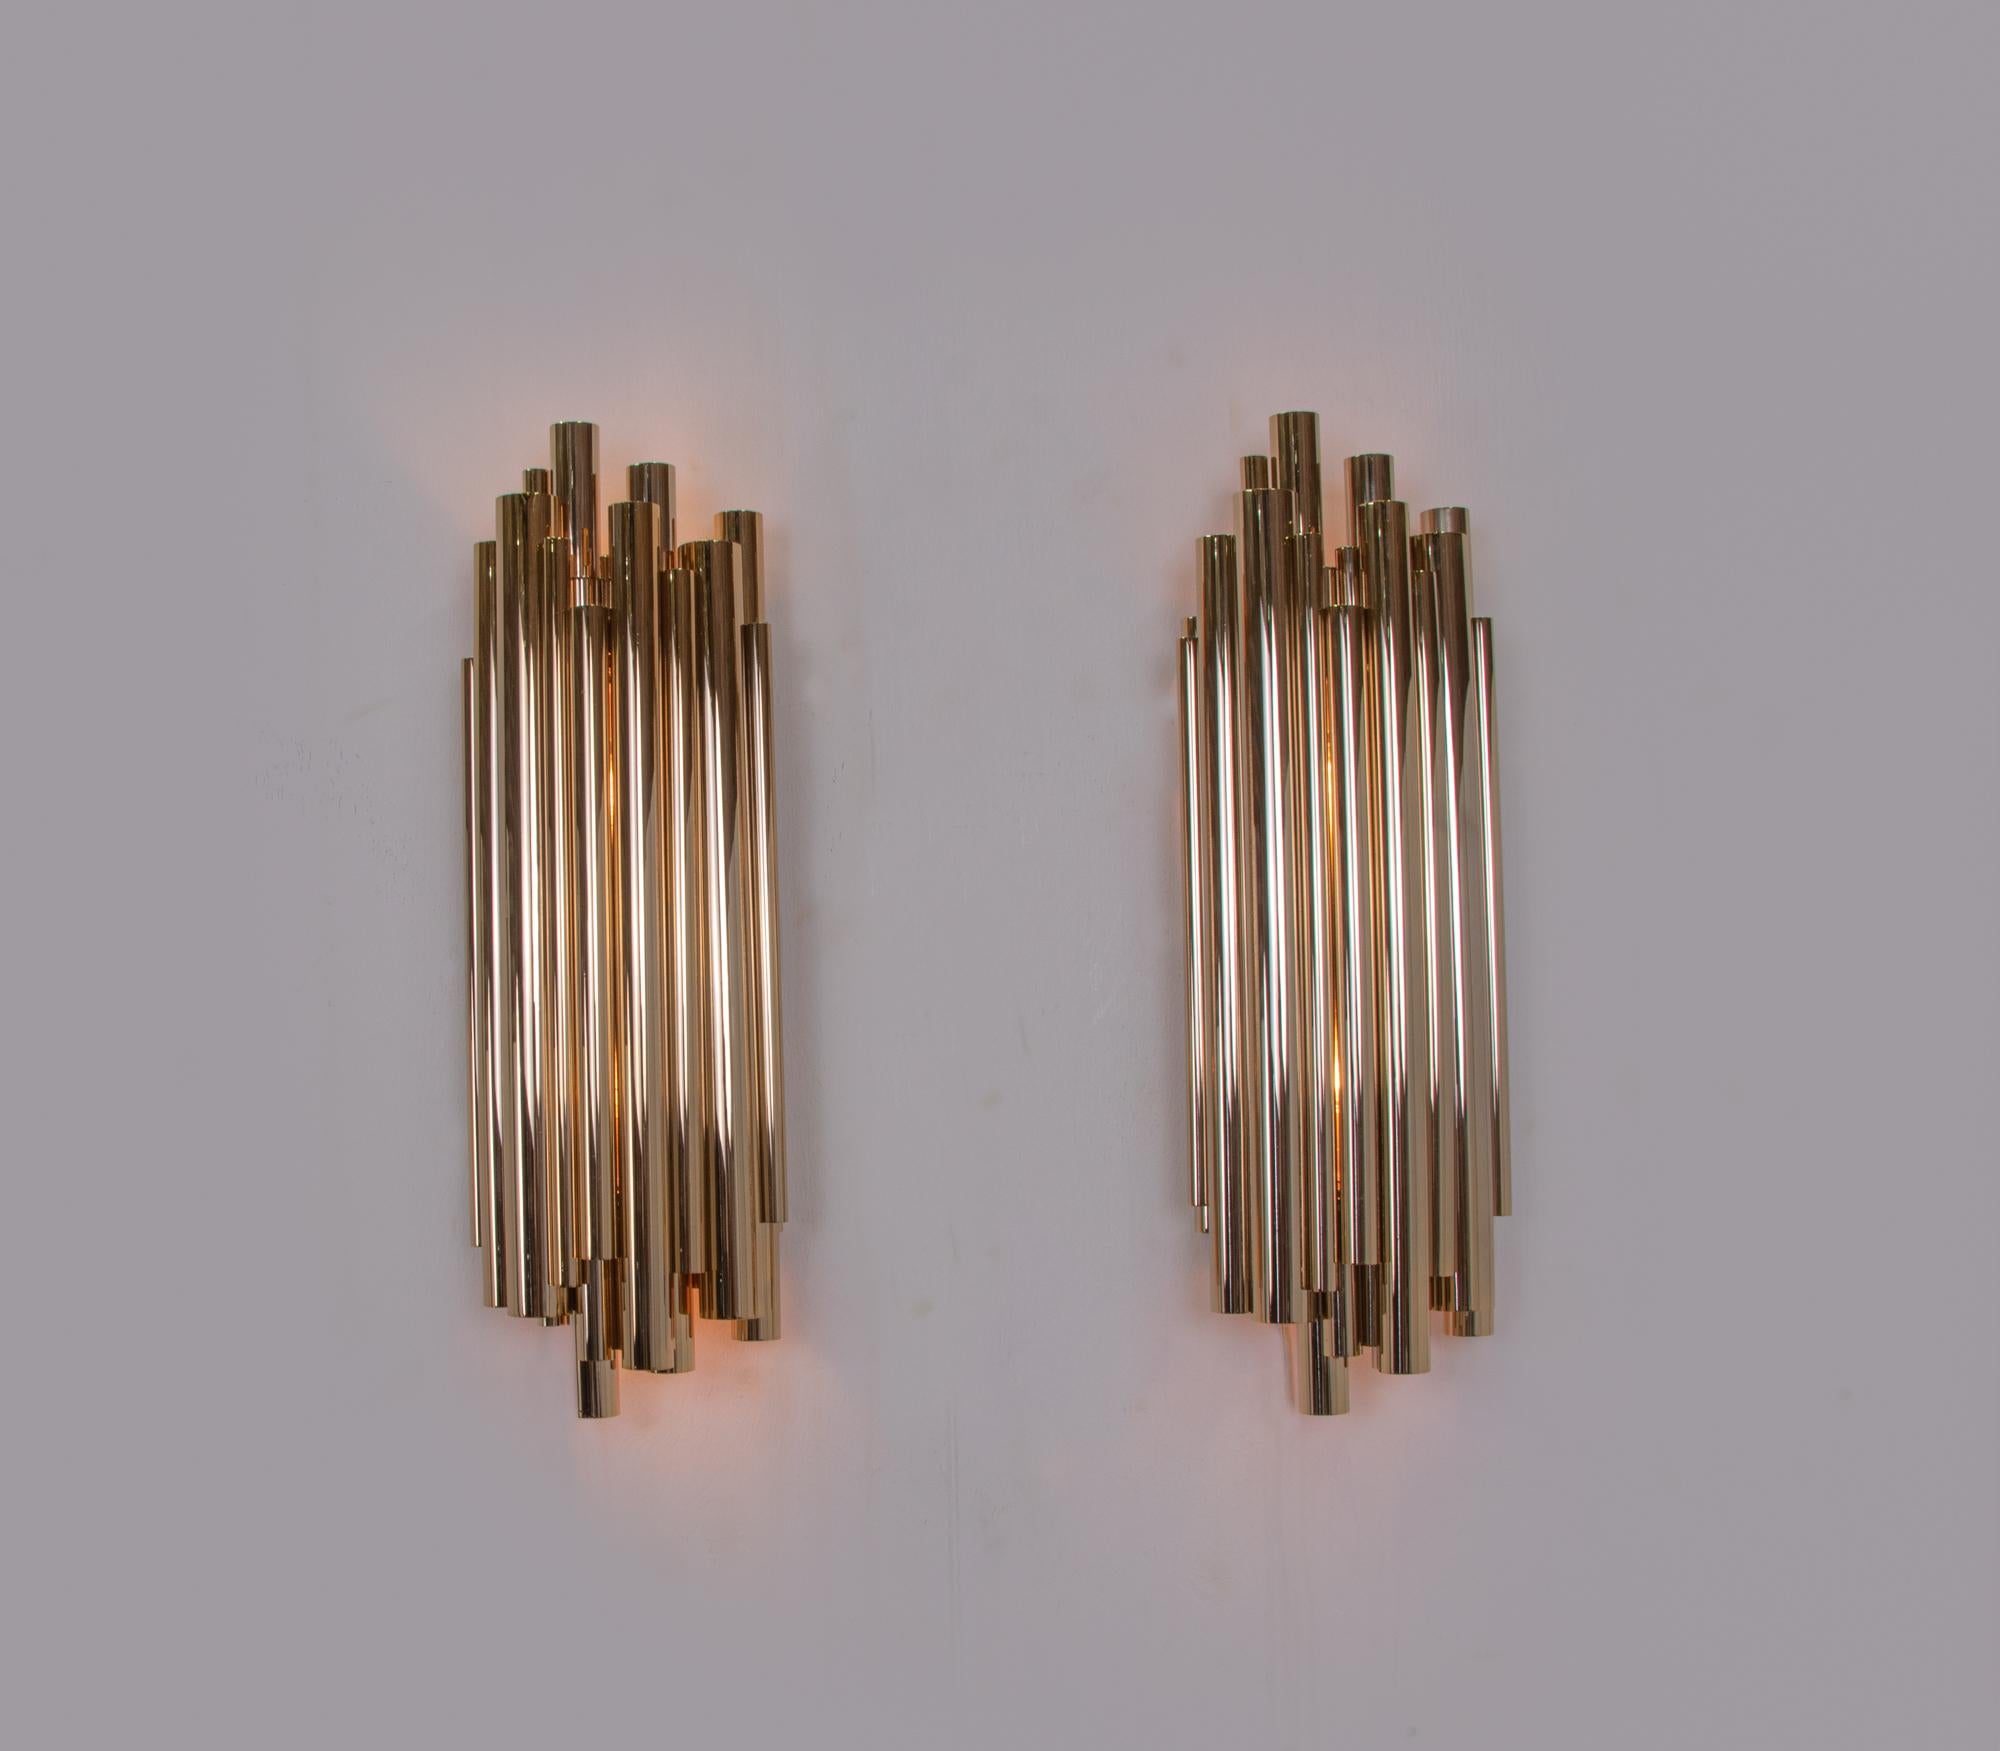 Elegant miminalist pair of large wall lights in handcrafted solid brass with gold-plated finish. These extraordinary lights were inspired by a pipe organ. These wall lamps emit a pleasant indirect light into the room and set accents even when unlit.